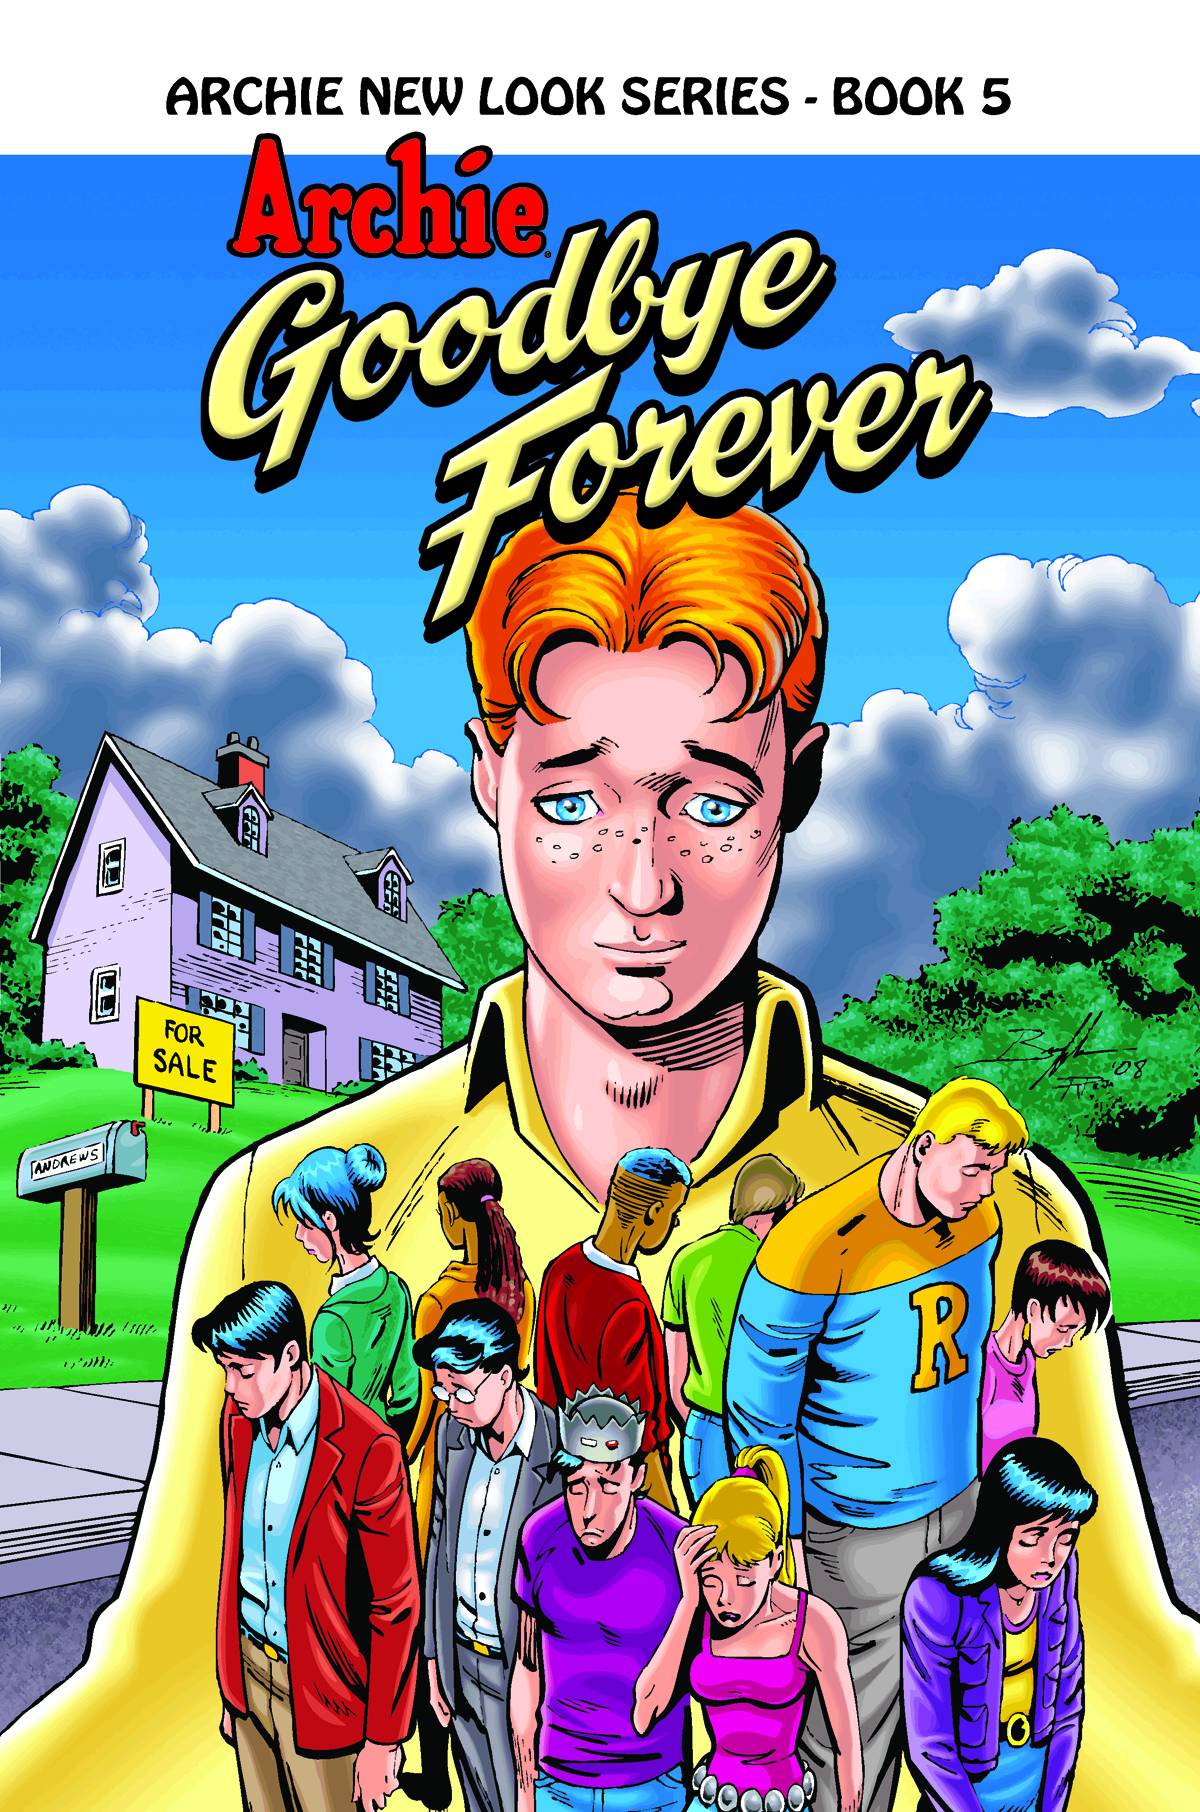 Archie New Look Series Graphic Novel Volume 5 Goodbye Forever